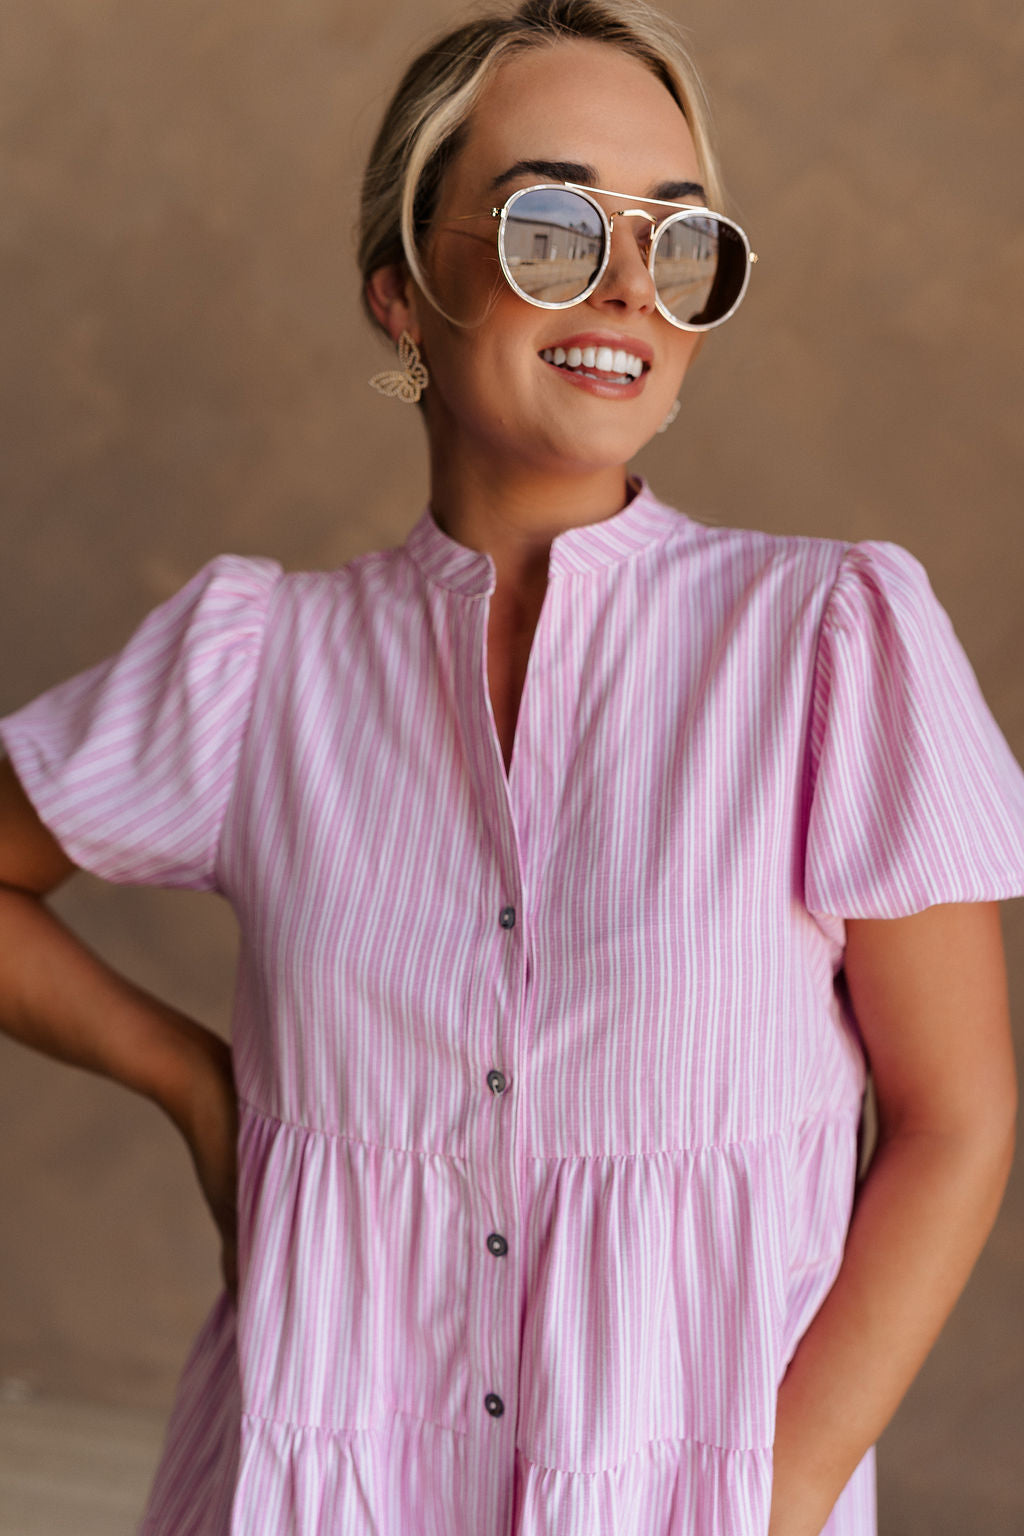 Upper body front view of female model wearing the Cameron Pink & White Striped Dress that has pink and white vertical striped fabric, short puff sleeves, a tiered skirt, and button up front.